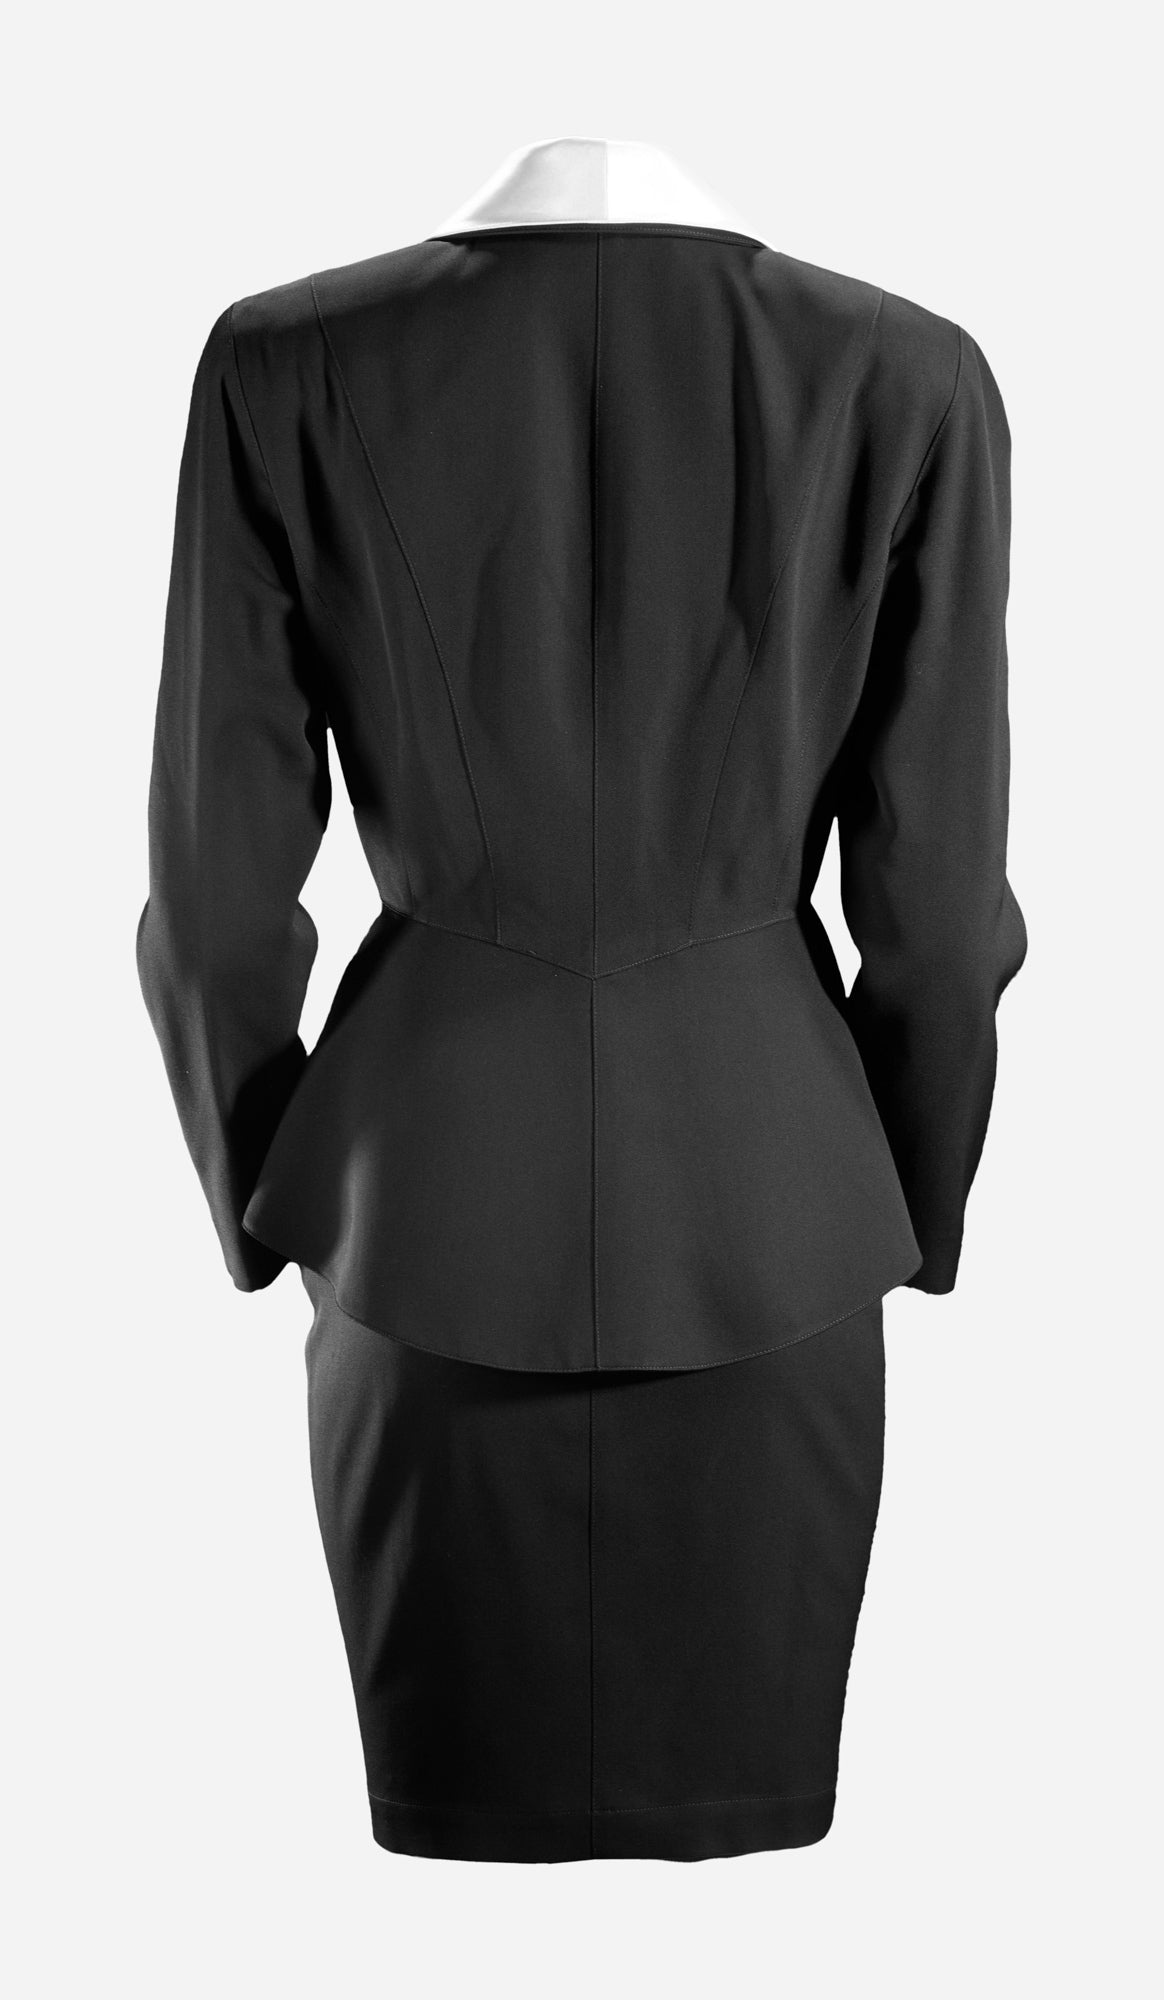  Thierry Mugler F/W 1992 Archival Black Skirt Suit with White Satin Notched Lapels BACK 3/10